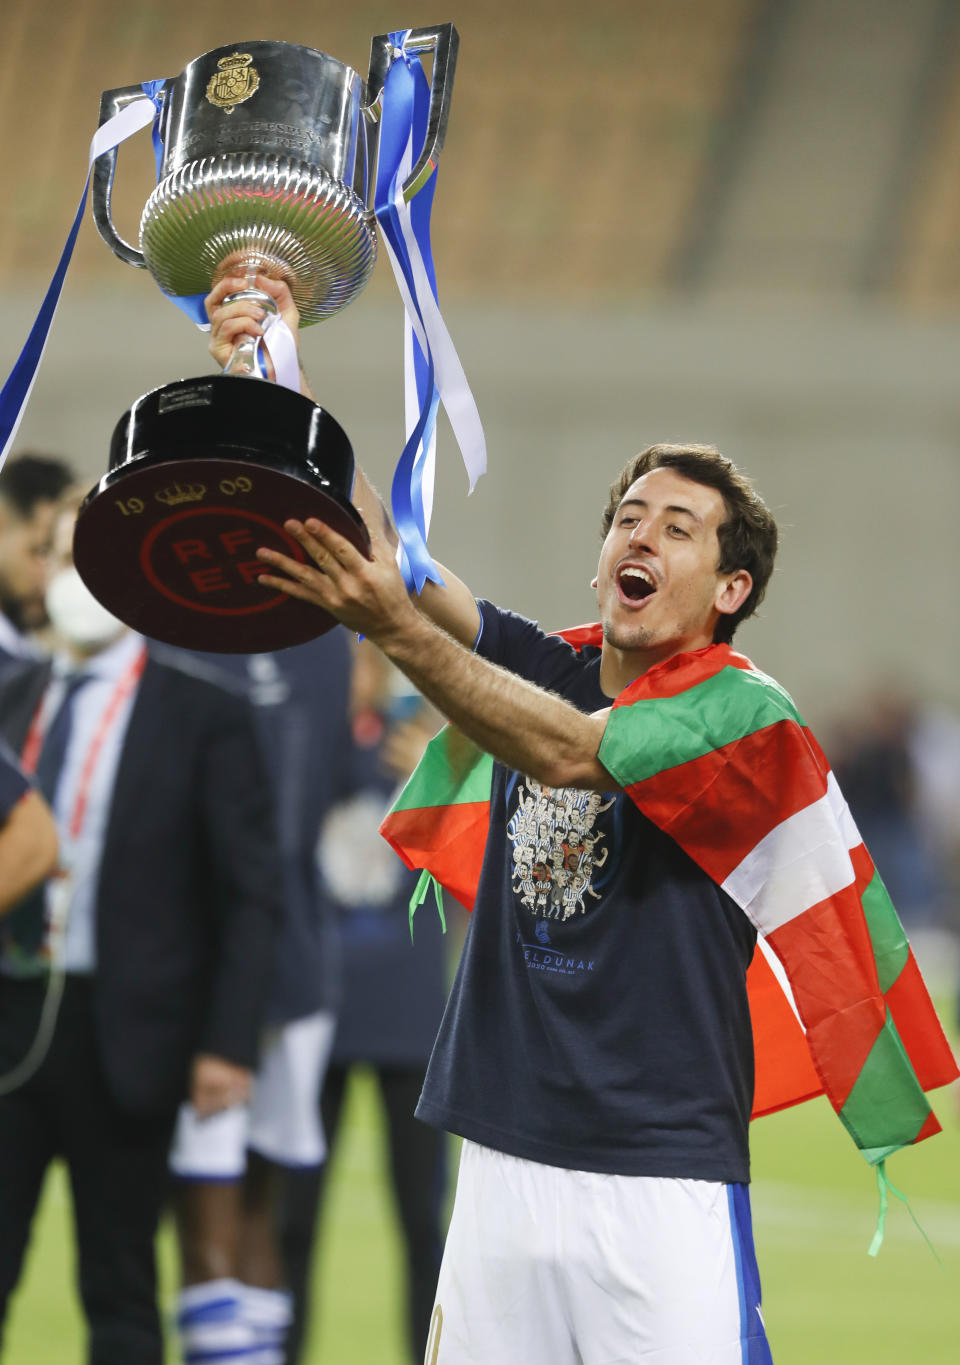 Real Sociedad's Mikel Oyarzabal, who scored the only goal, celebrates winning the final of the 2020 Copa del Rey, or King's Cup, soccer match between Athletic Bilbao and Real Sociedad at Estadio de La Cartuja in Sevilla, Spain, Saturday April 3, 2021. The game is the rescheduled final of the 2019-2020 competition which was originally postponed due to the coronavirus pandemic. (AP Photo/Angel Fernandez)